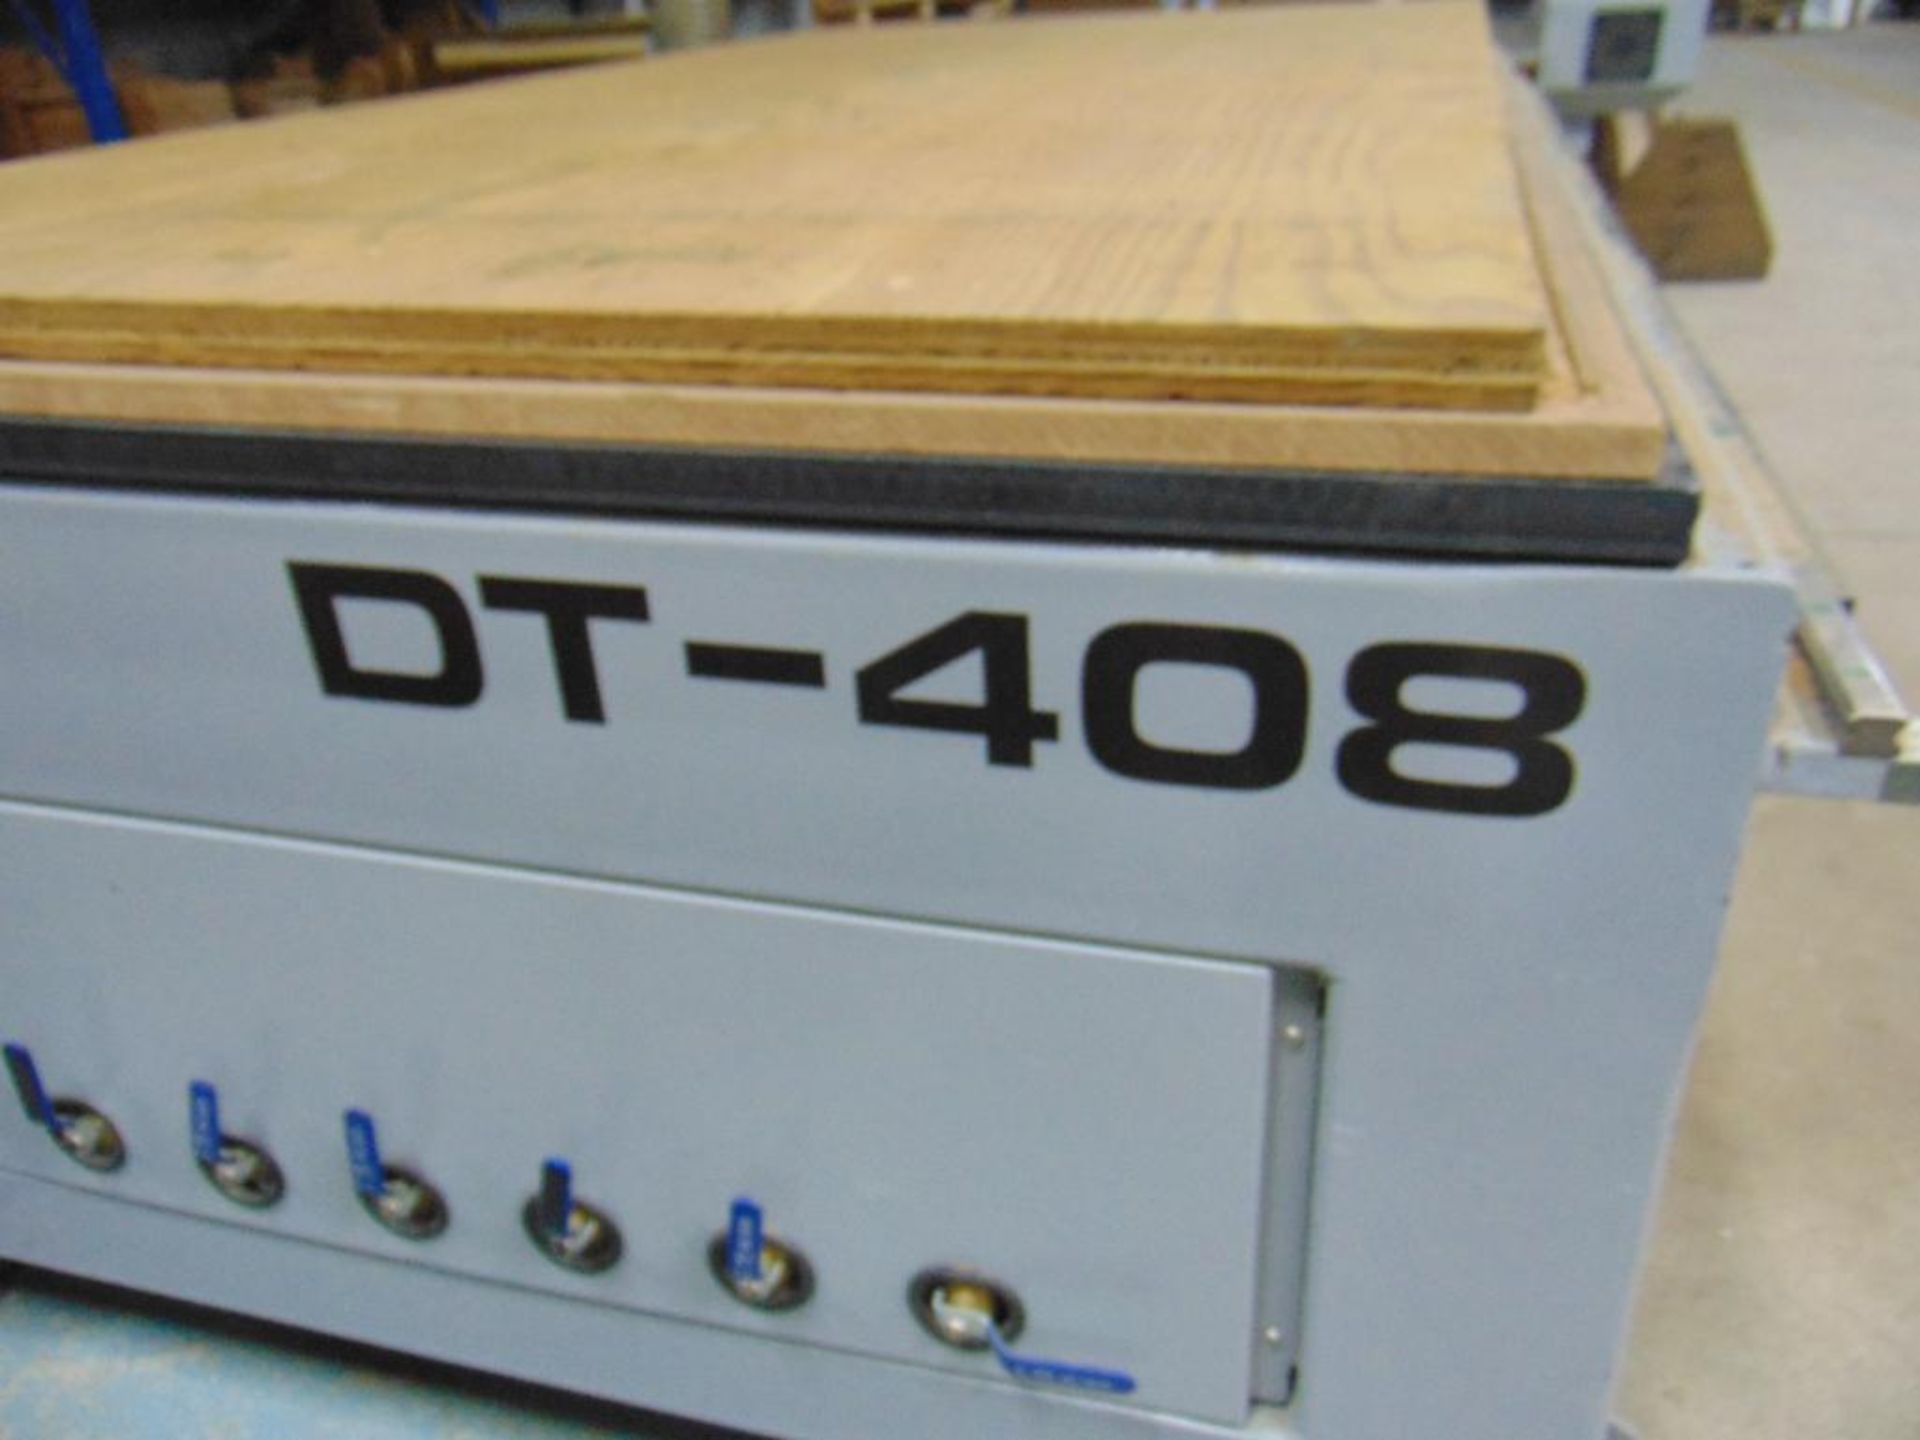 Digitool Model DT408 CNC Router - Image 5 of 9